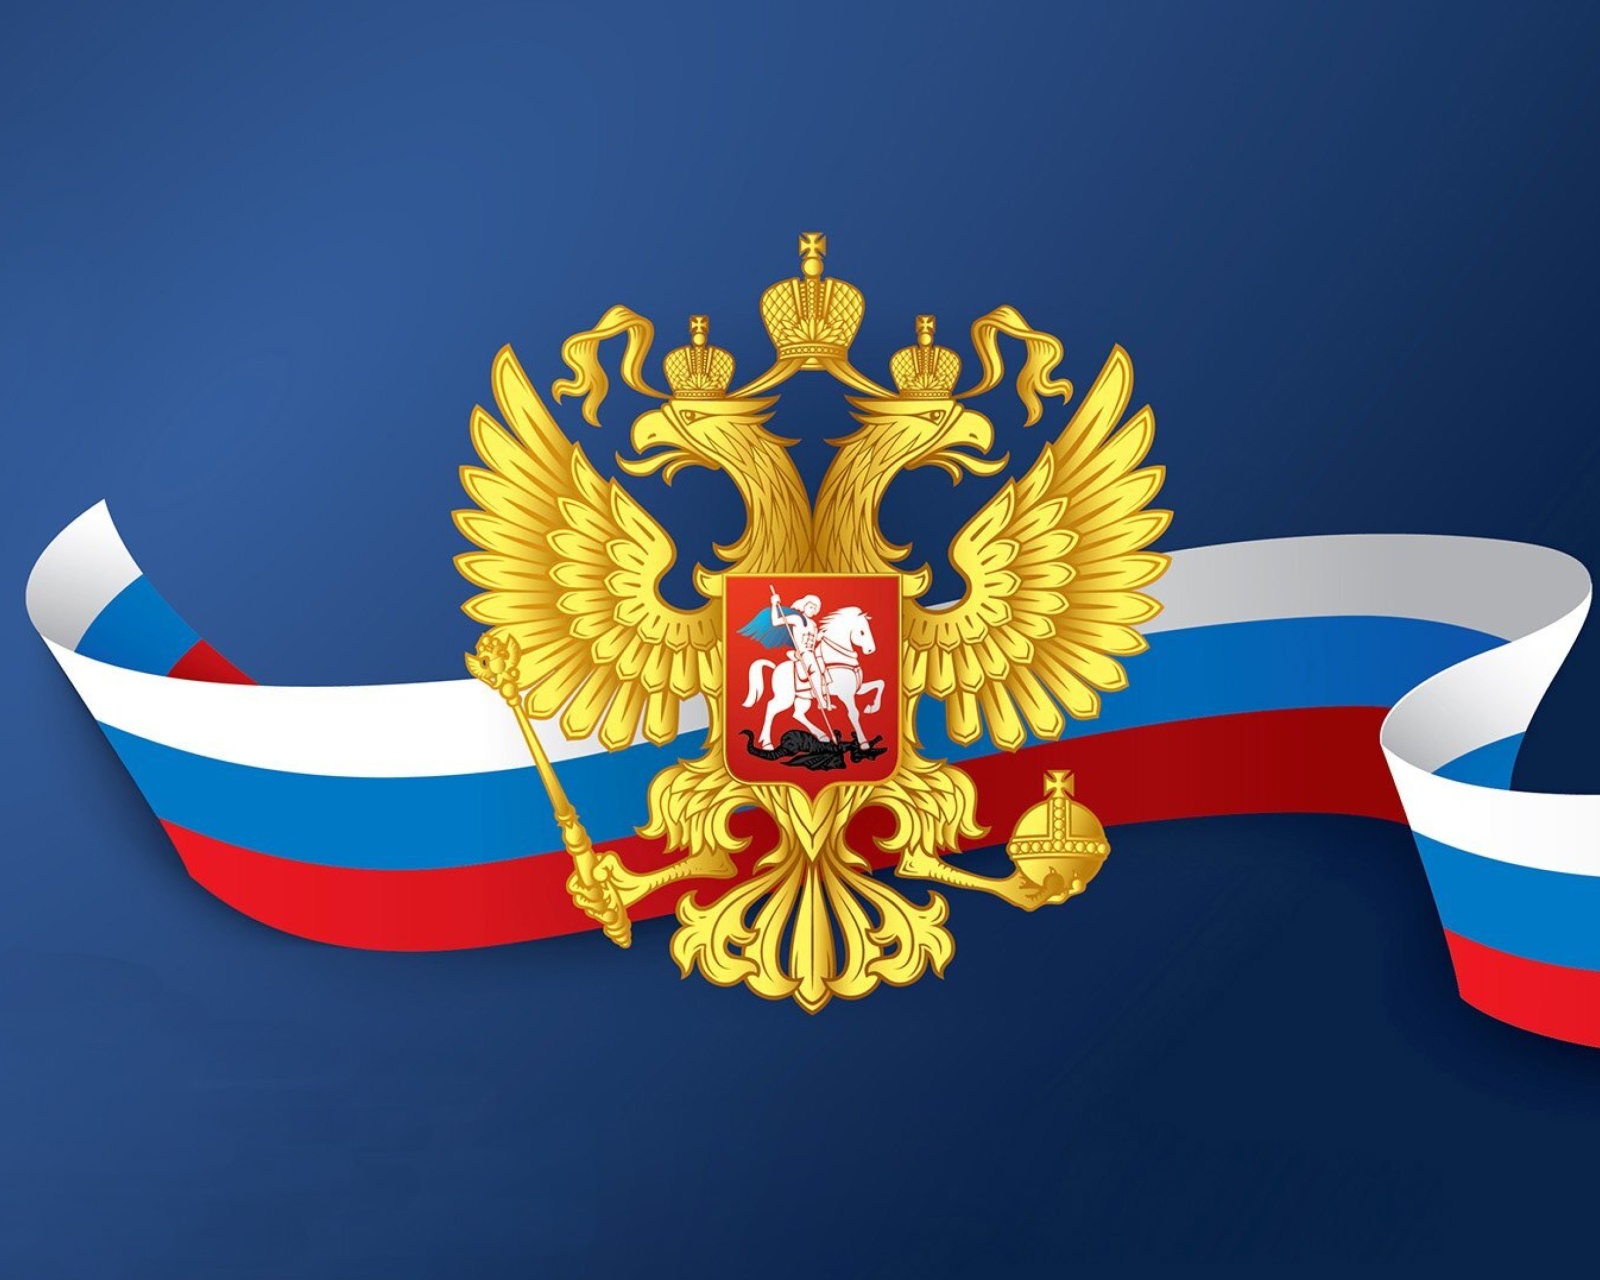 Das Russian coat of arms and flag Wallpaper 1600x1280